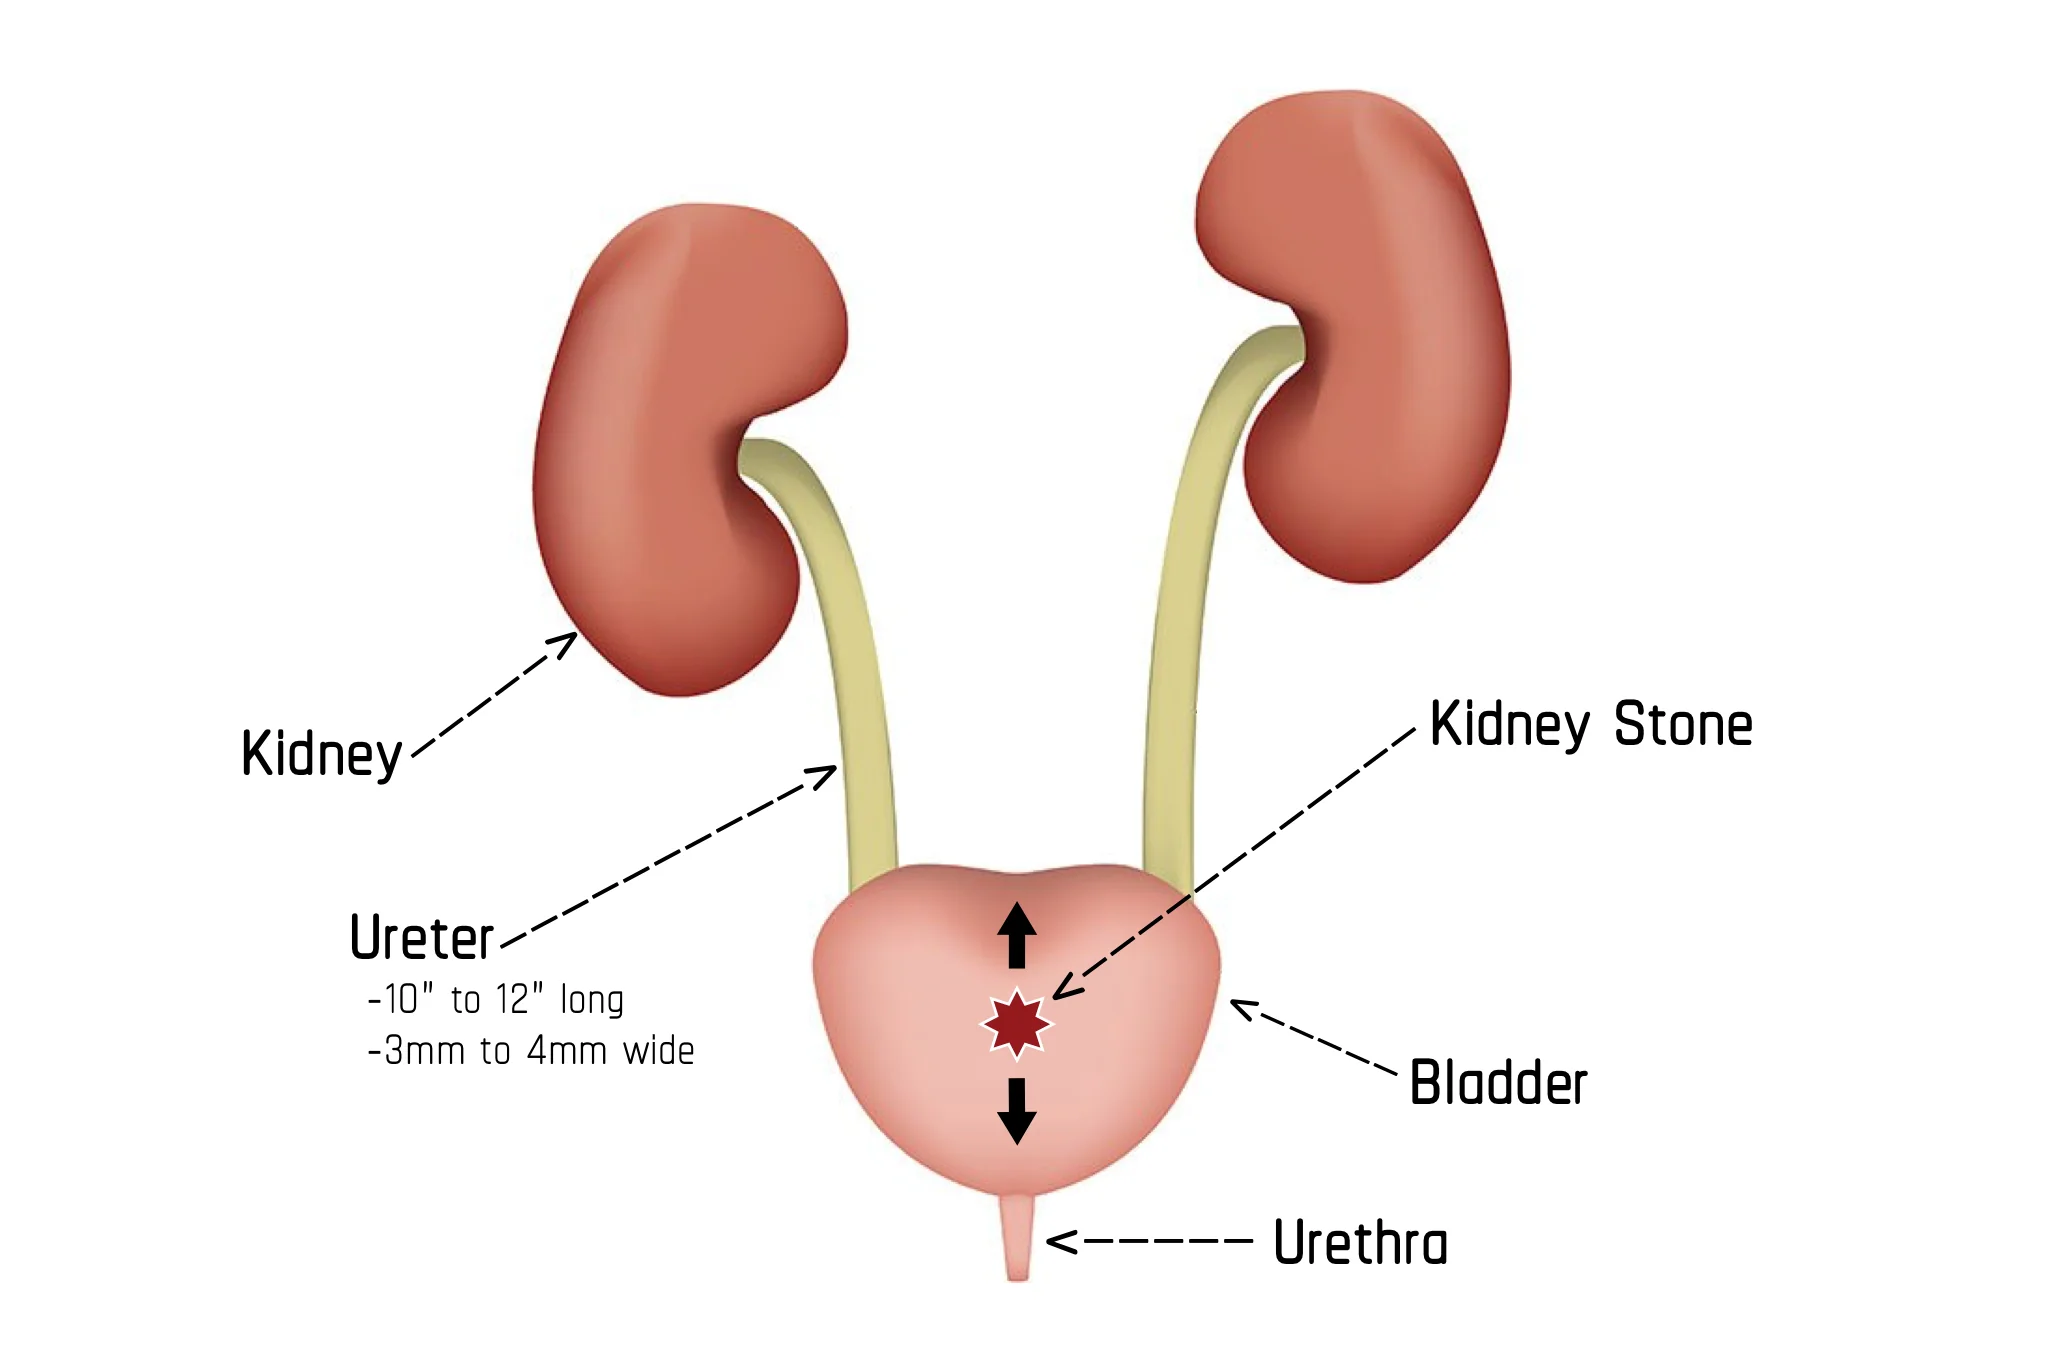 Illustration showing Stage 3 of Passing a Kidney Stone